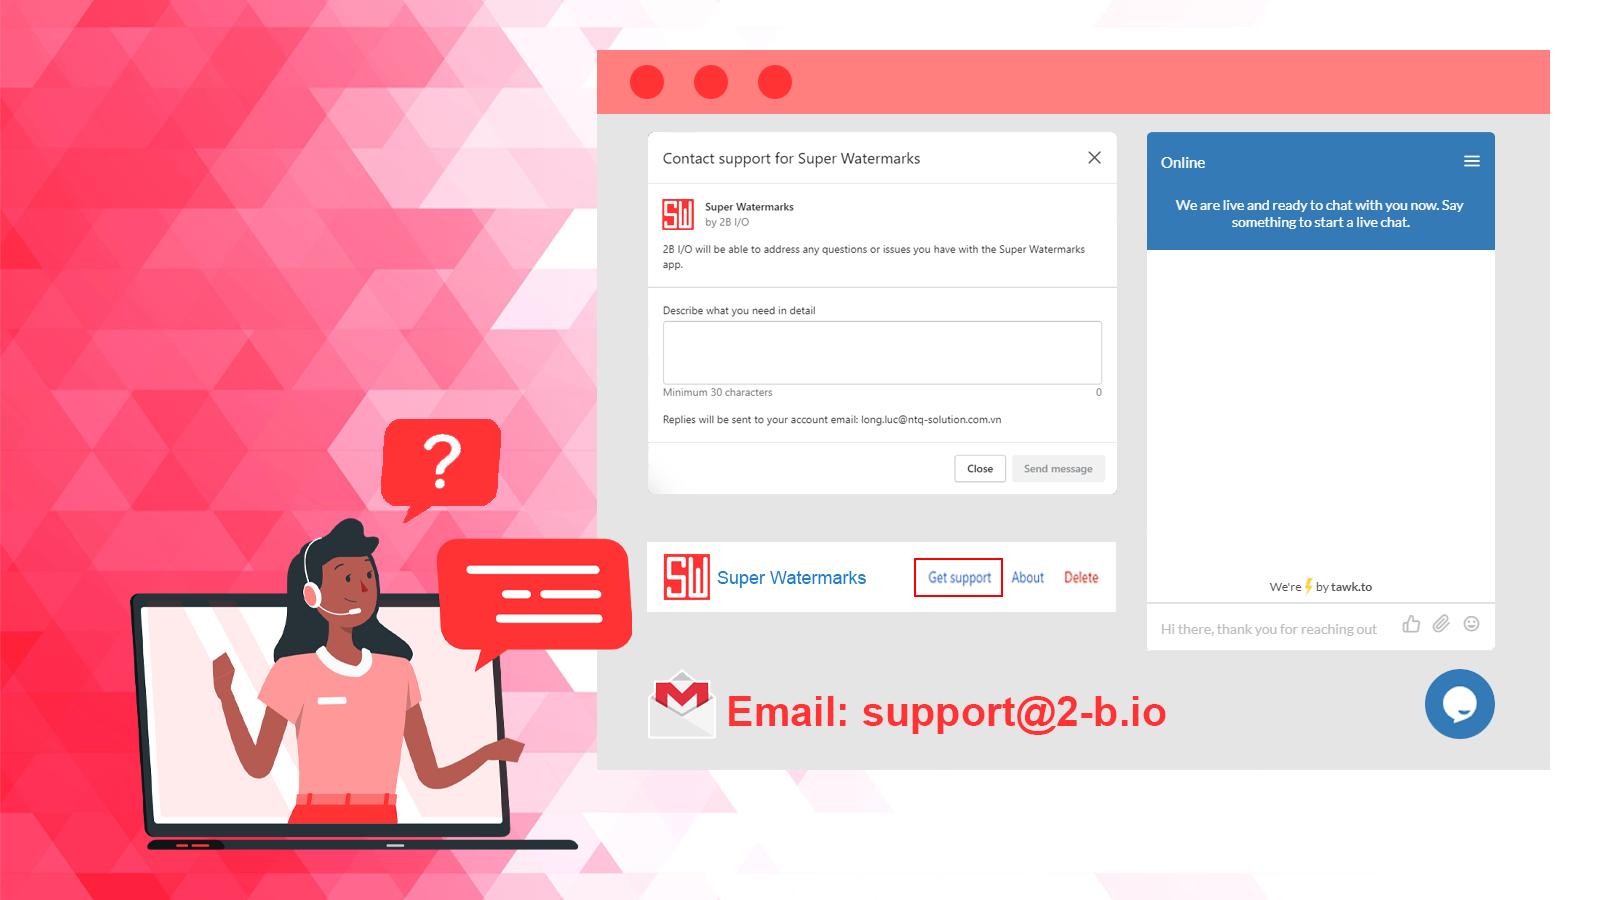  - For more details, Super Watermarks assists you via email support@2-b.io or Live Chat in our business day